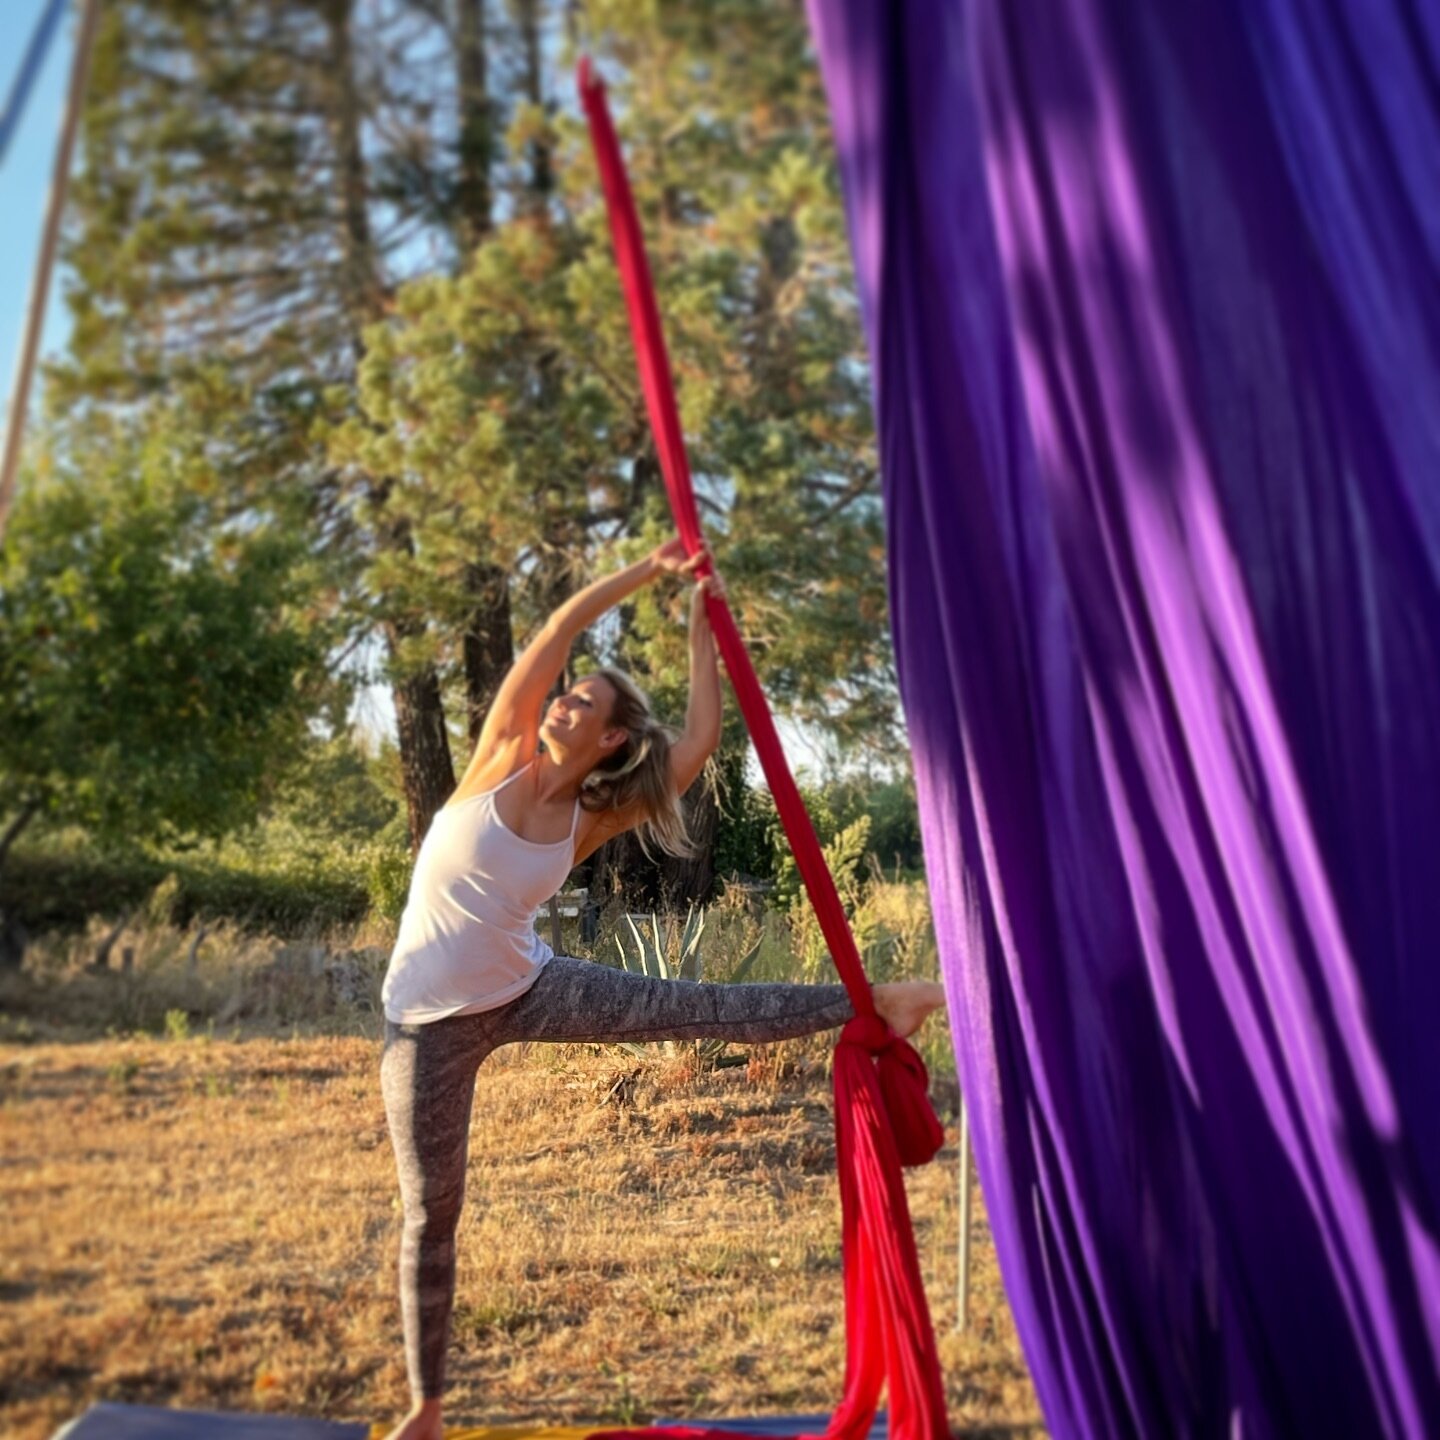 Deliberating on taking your first aerial class?!

I have worked with new students for over seven years and enjoy finding what *works* for each client!
No one arrives with the same background, ability or skill level, so there is never an expectation t